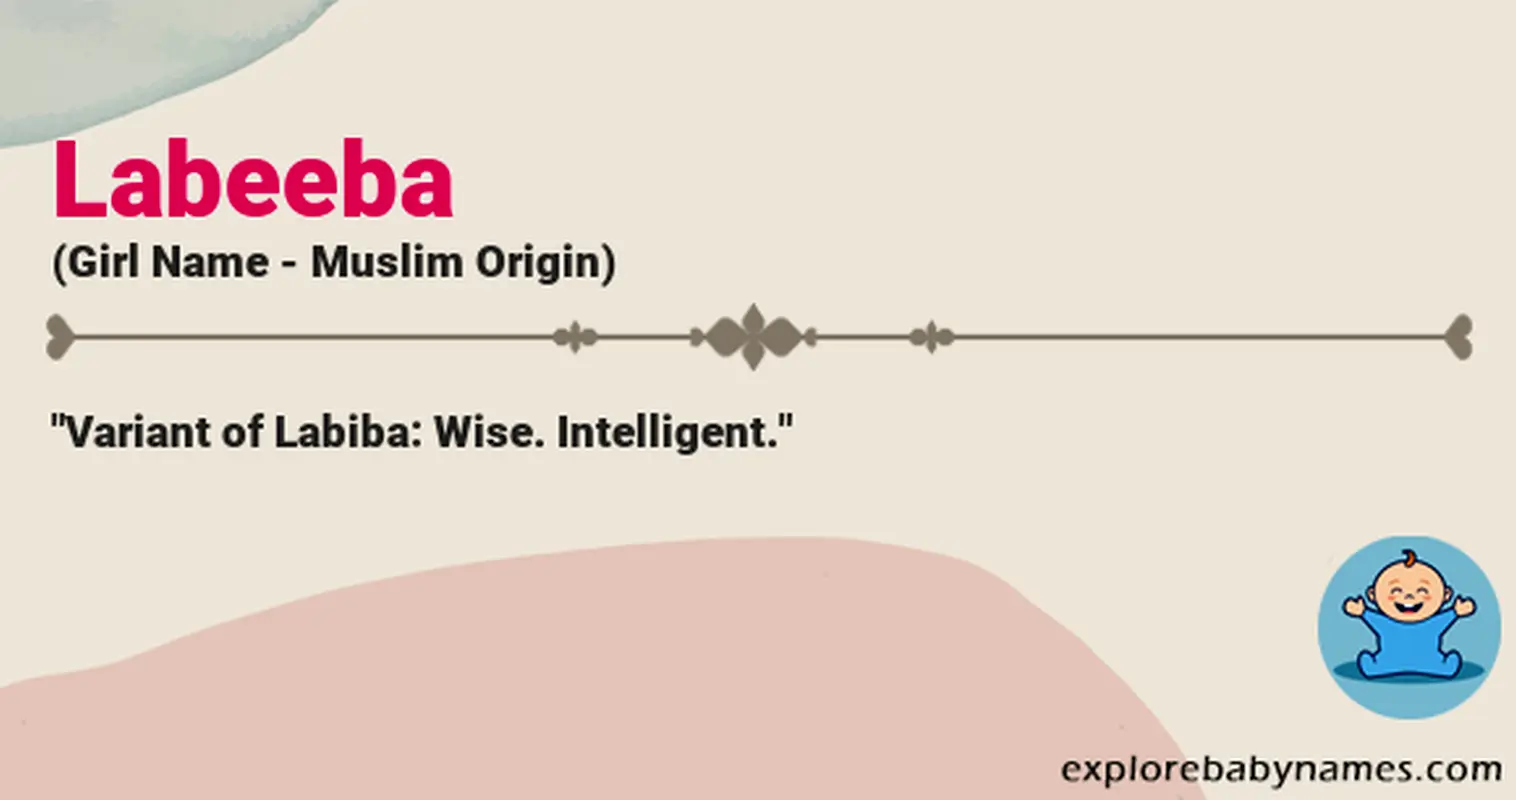 Meaning of Labeeba